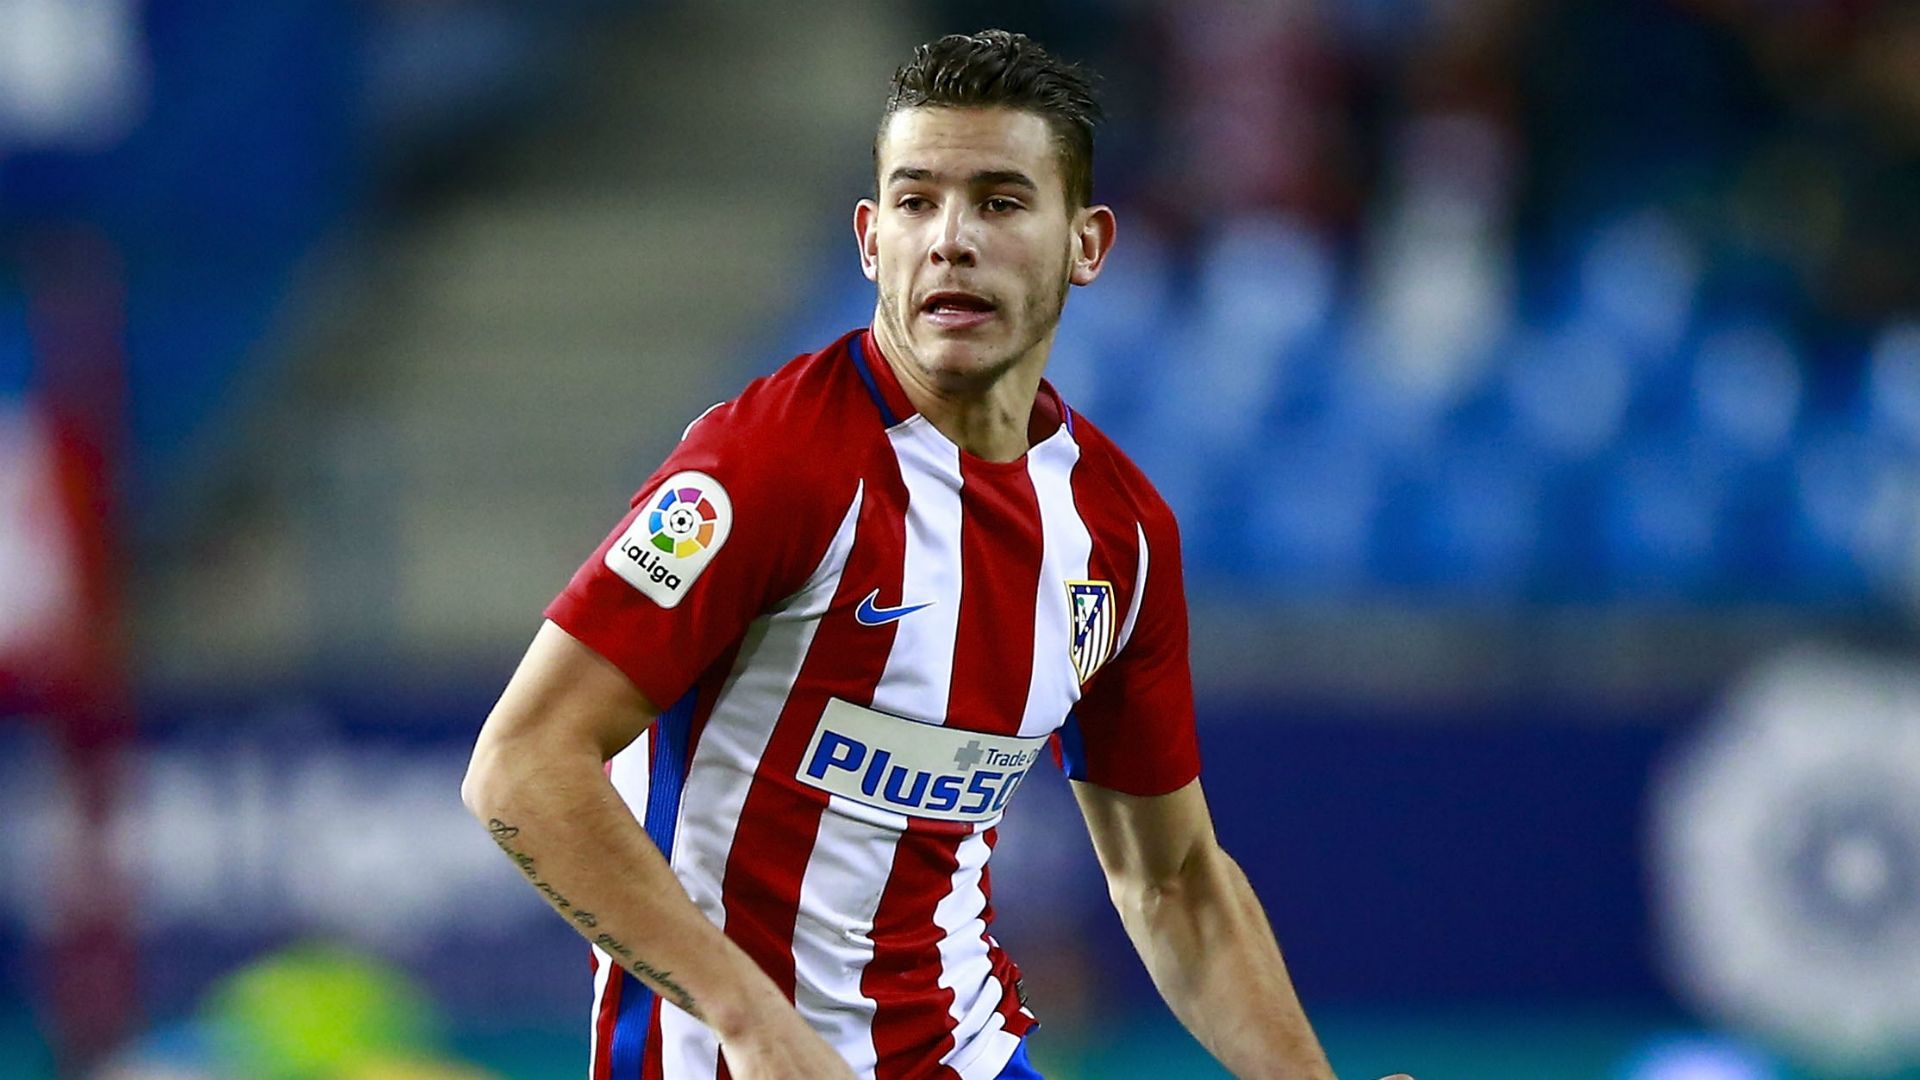 LaLiga: Lucas Hernandez Signs New Five Year Atletico Madrid Contract